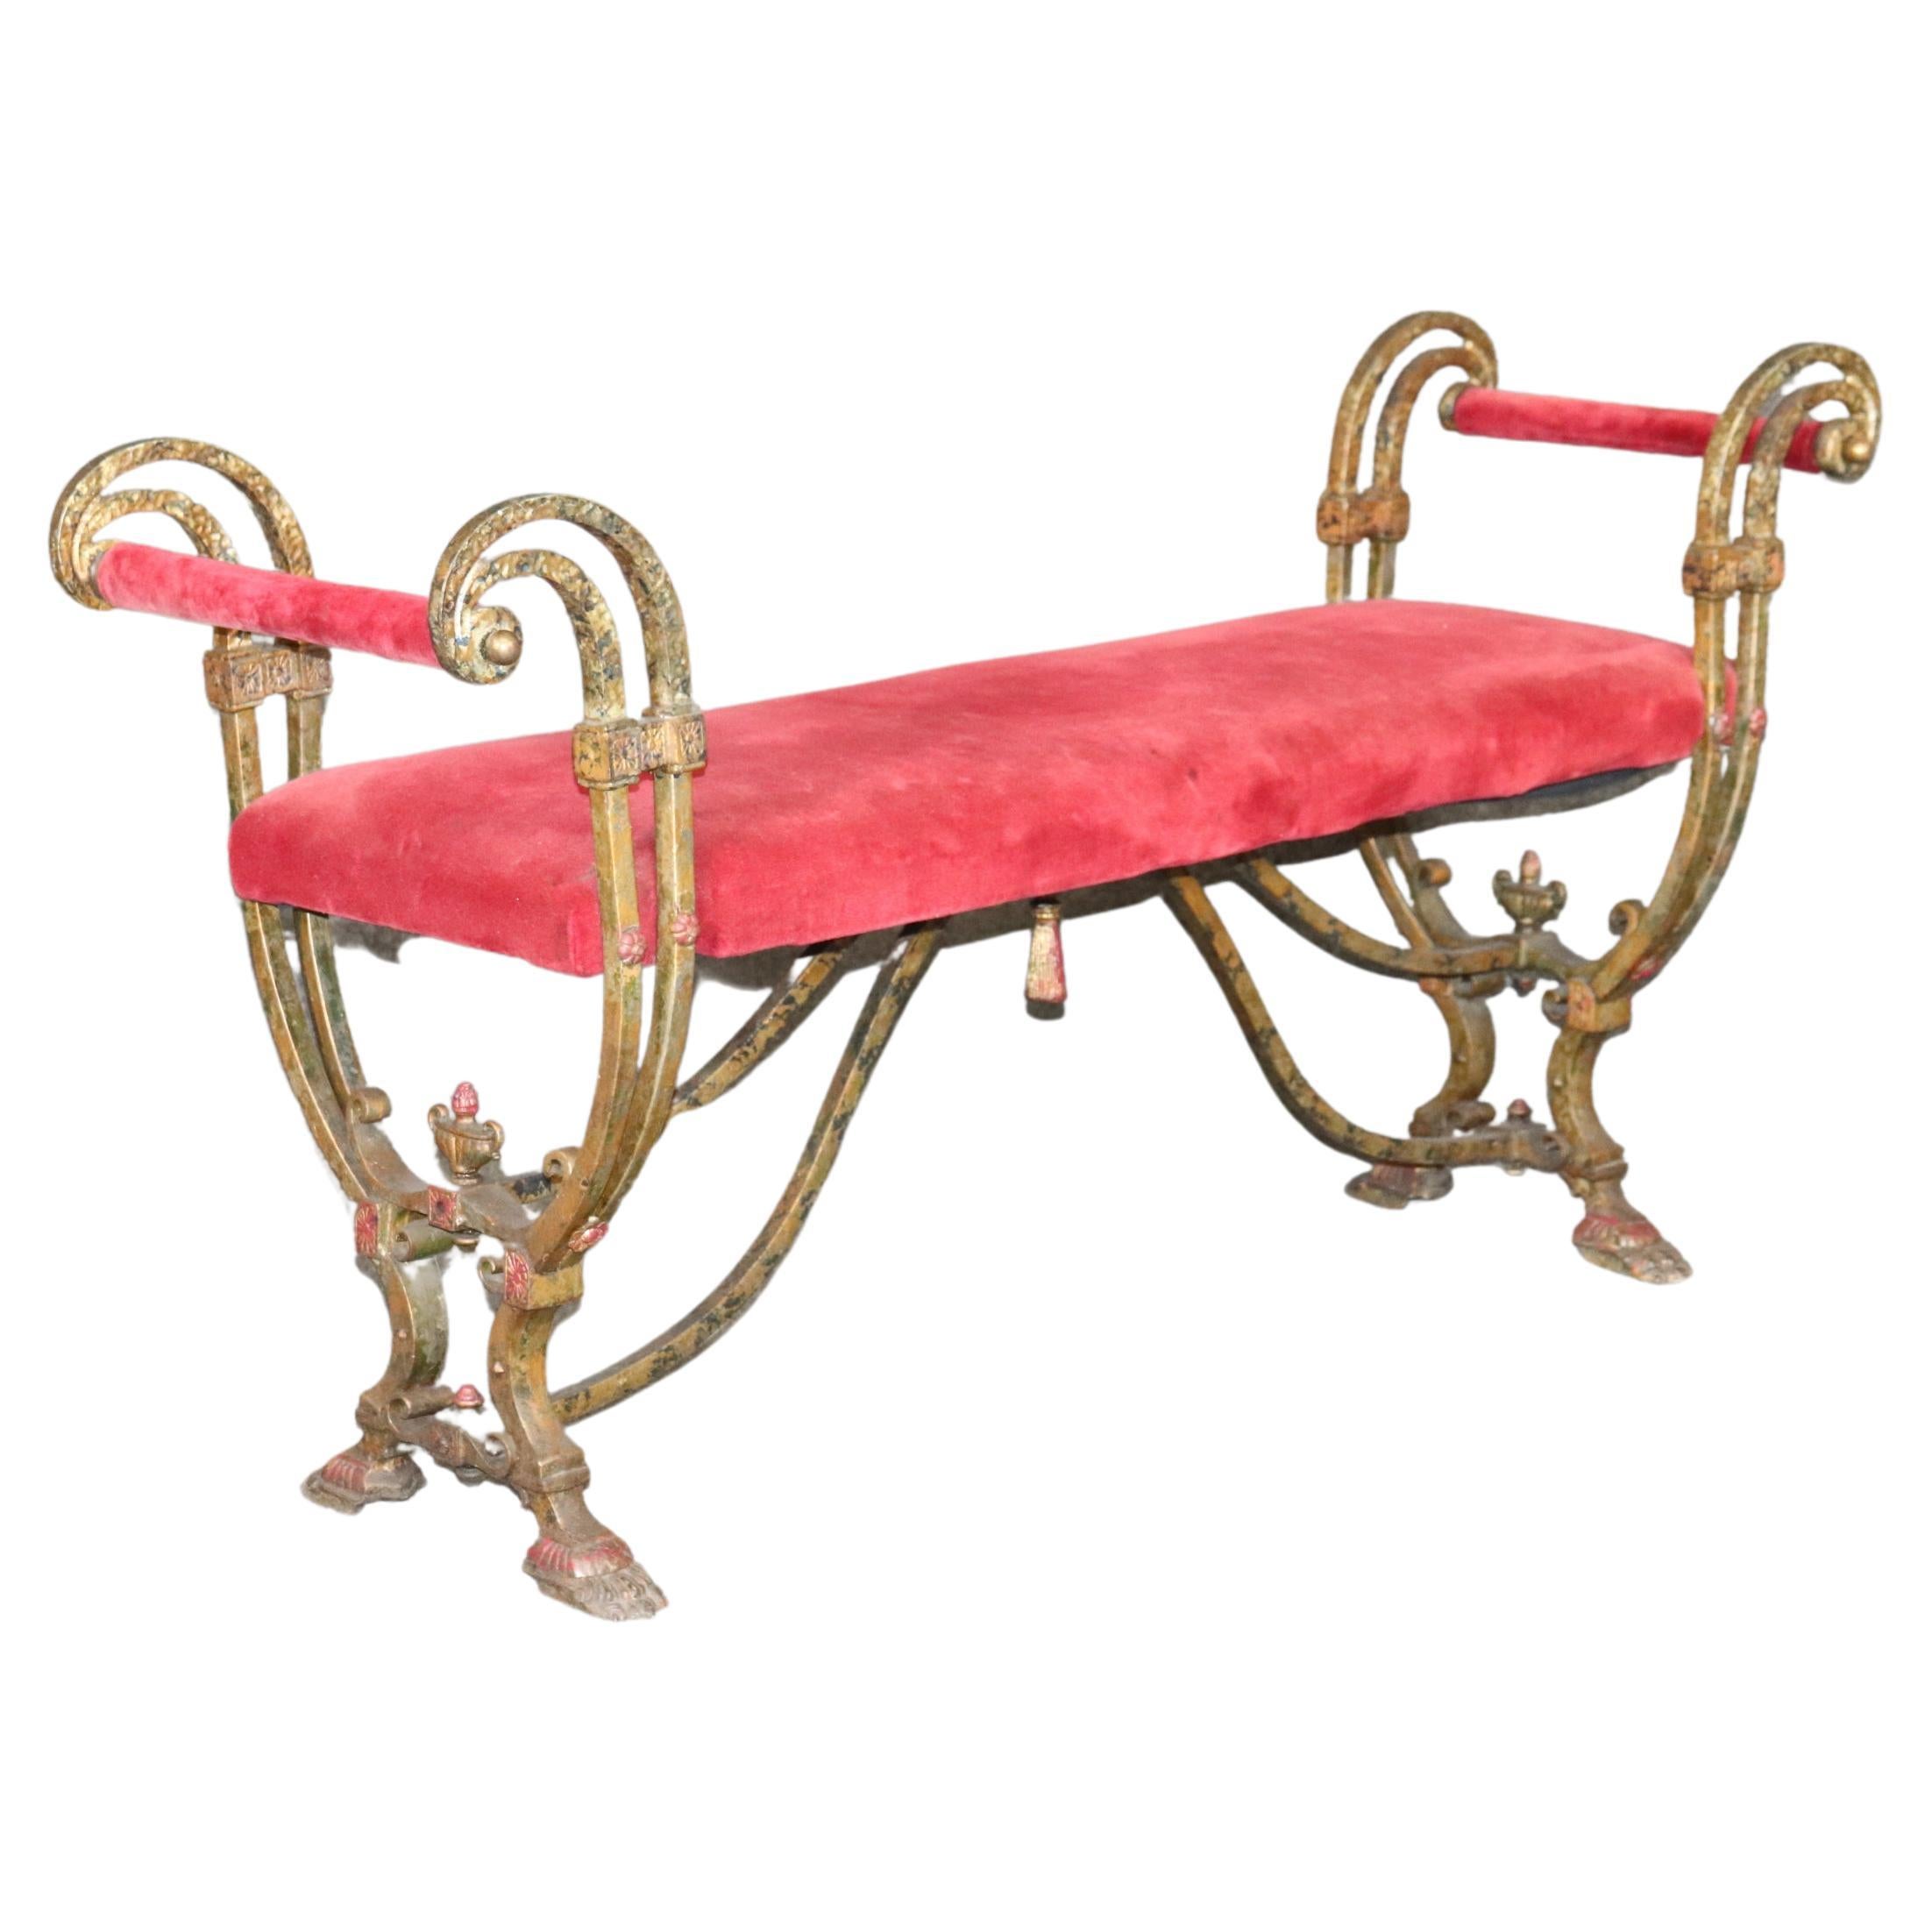 Oscar Bach Style Hand-Wrought Iron Upholstered Window Bench circa 1930 For Sale